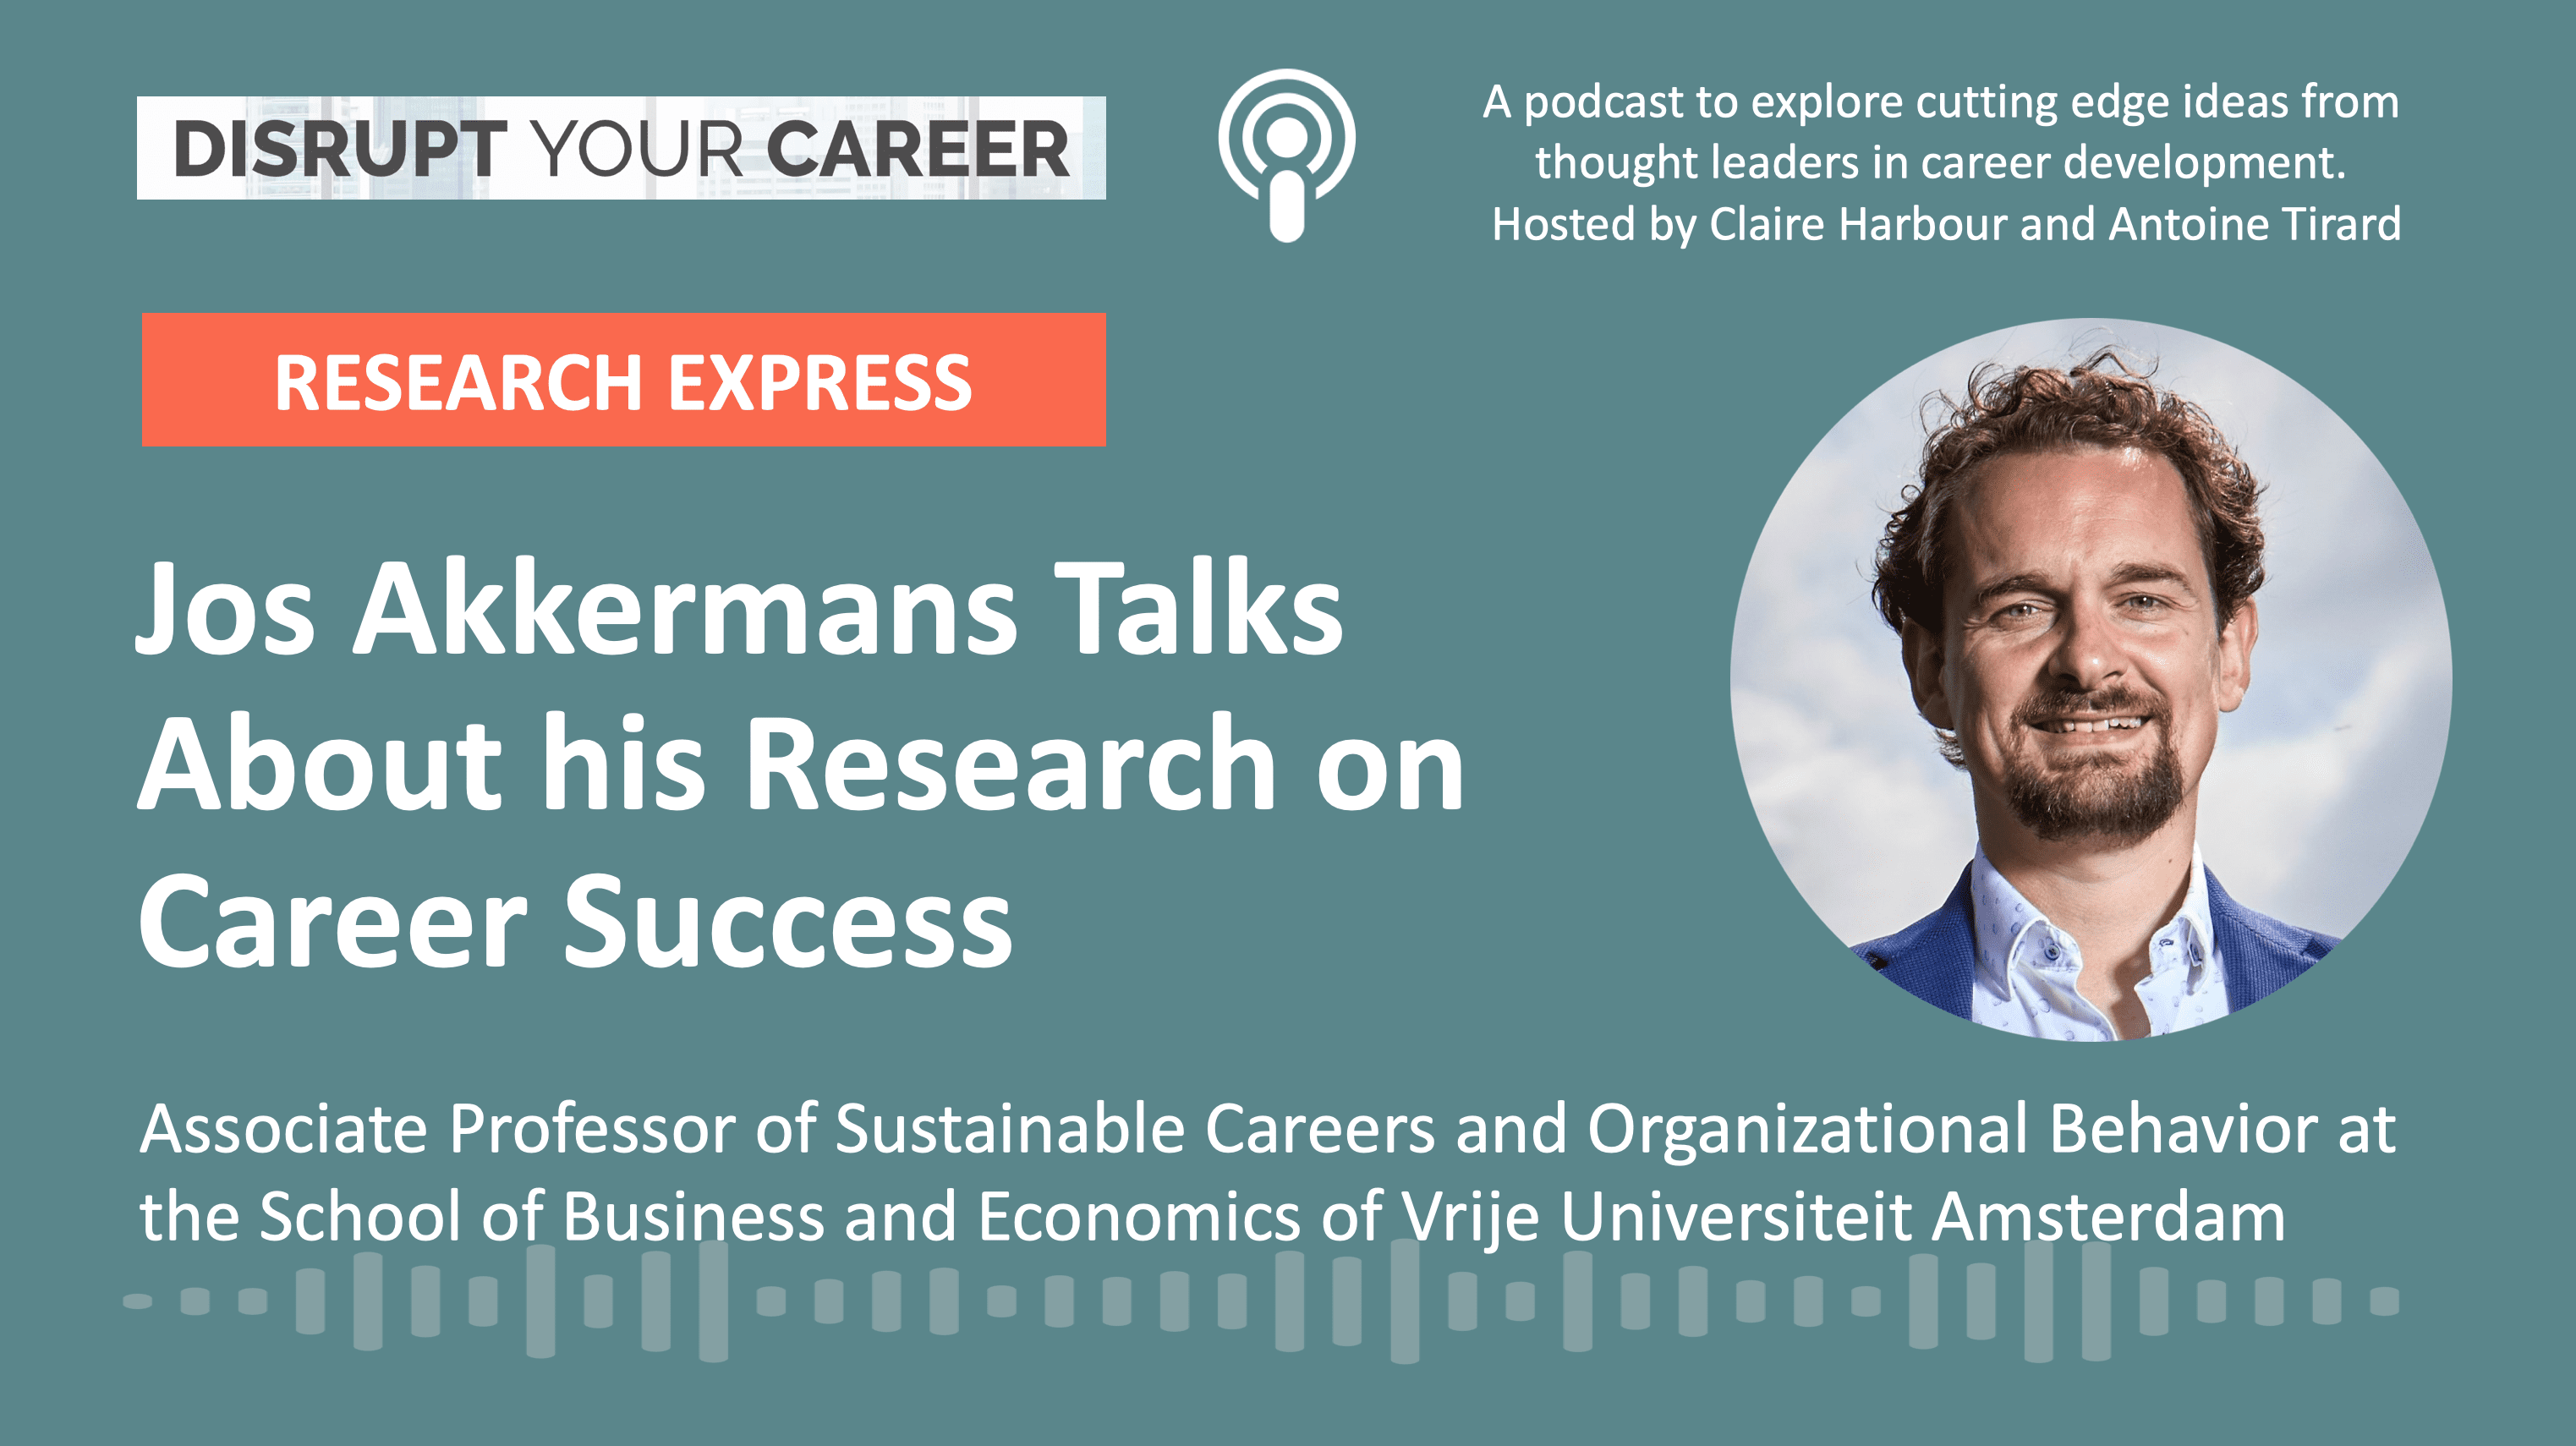 Jos Akkermans Talks About his Research on Career Success